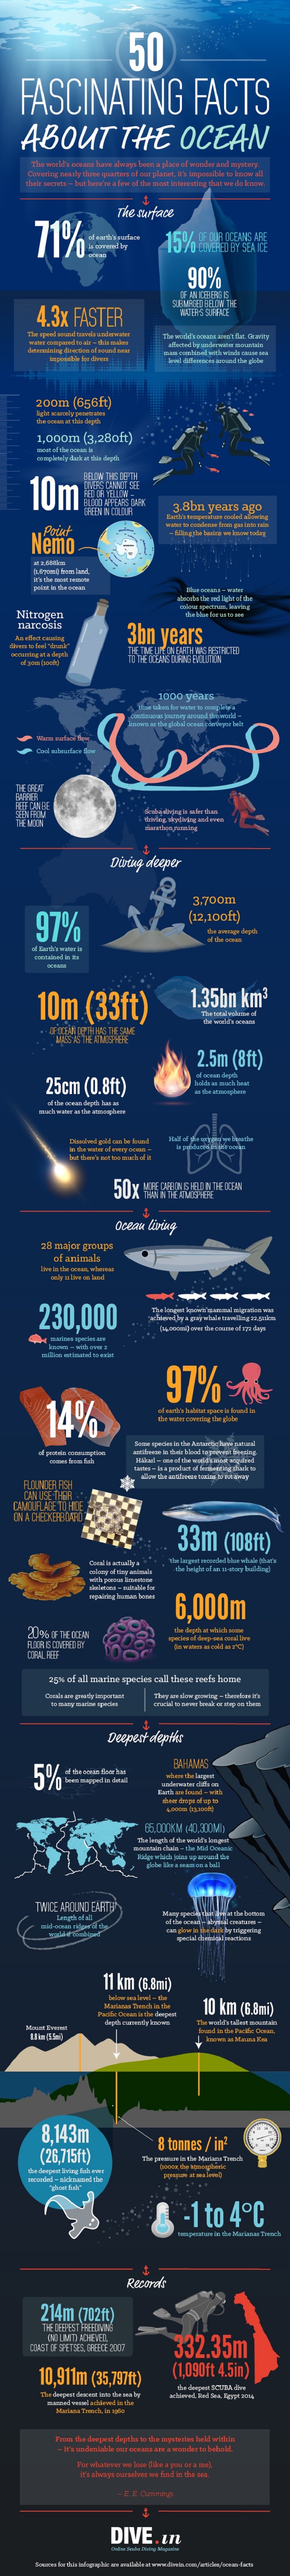 50 facts about the ocean